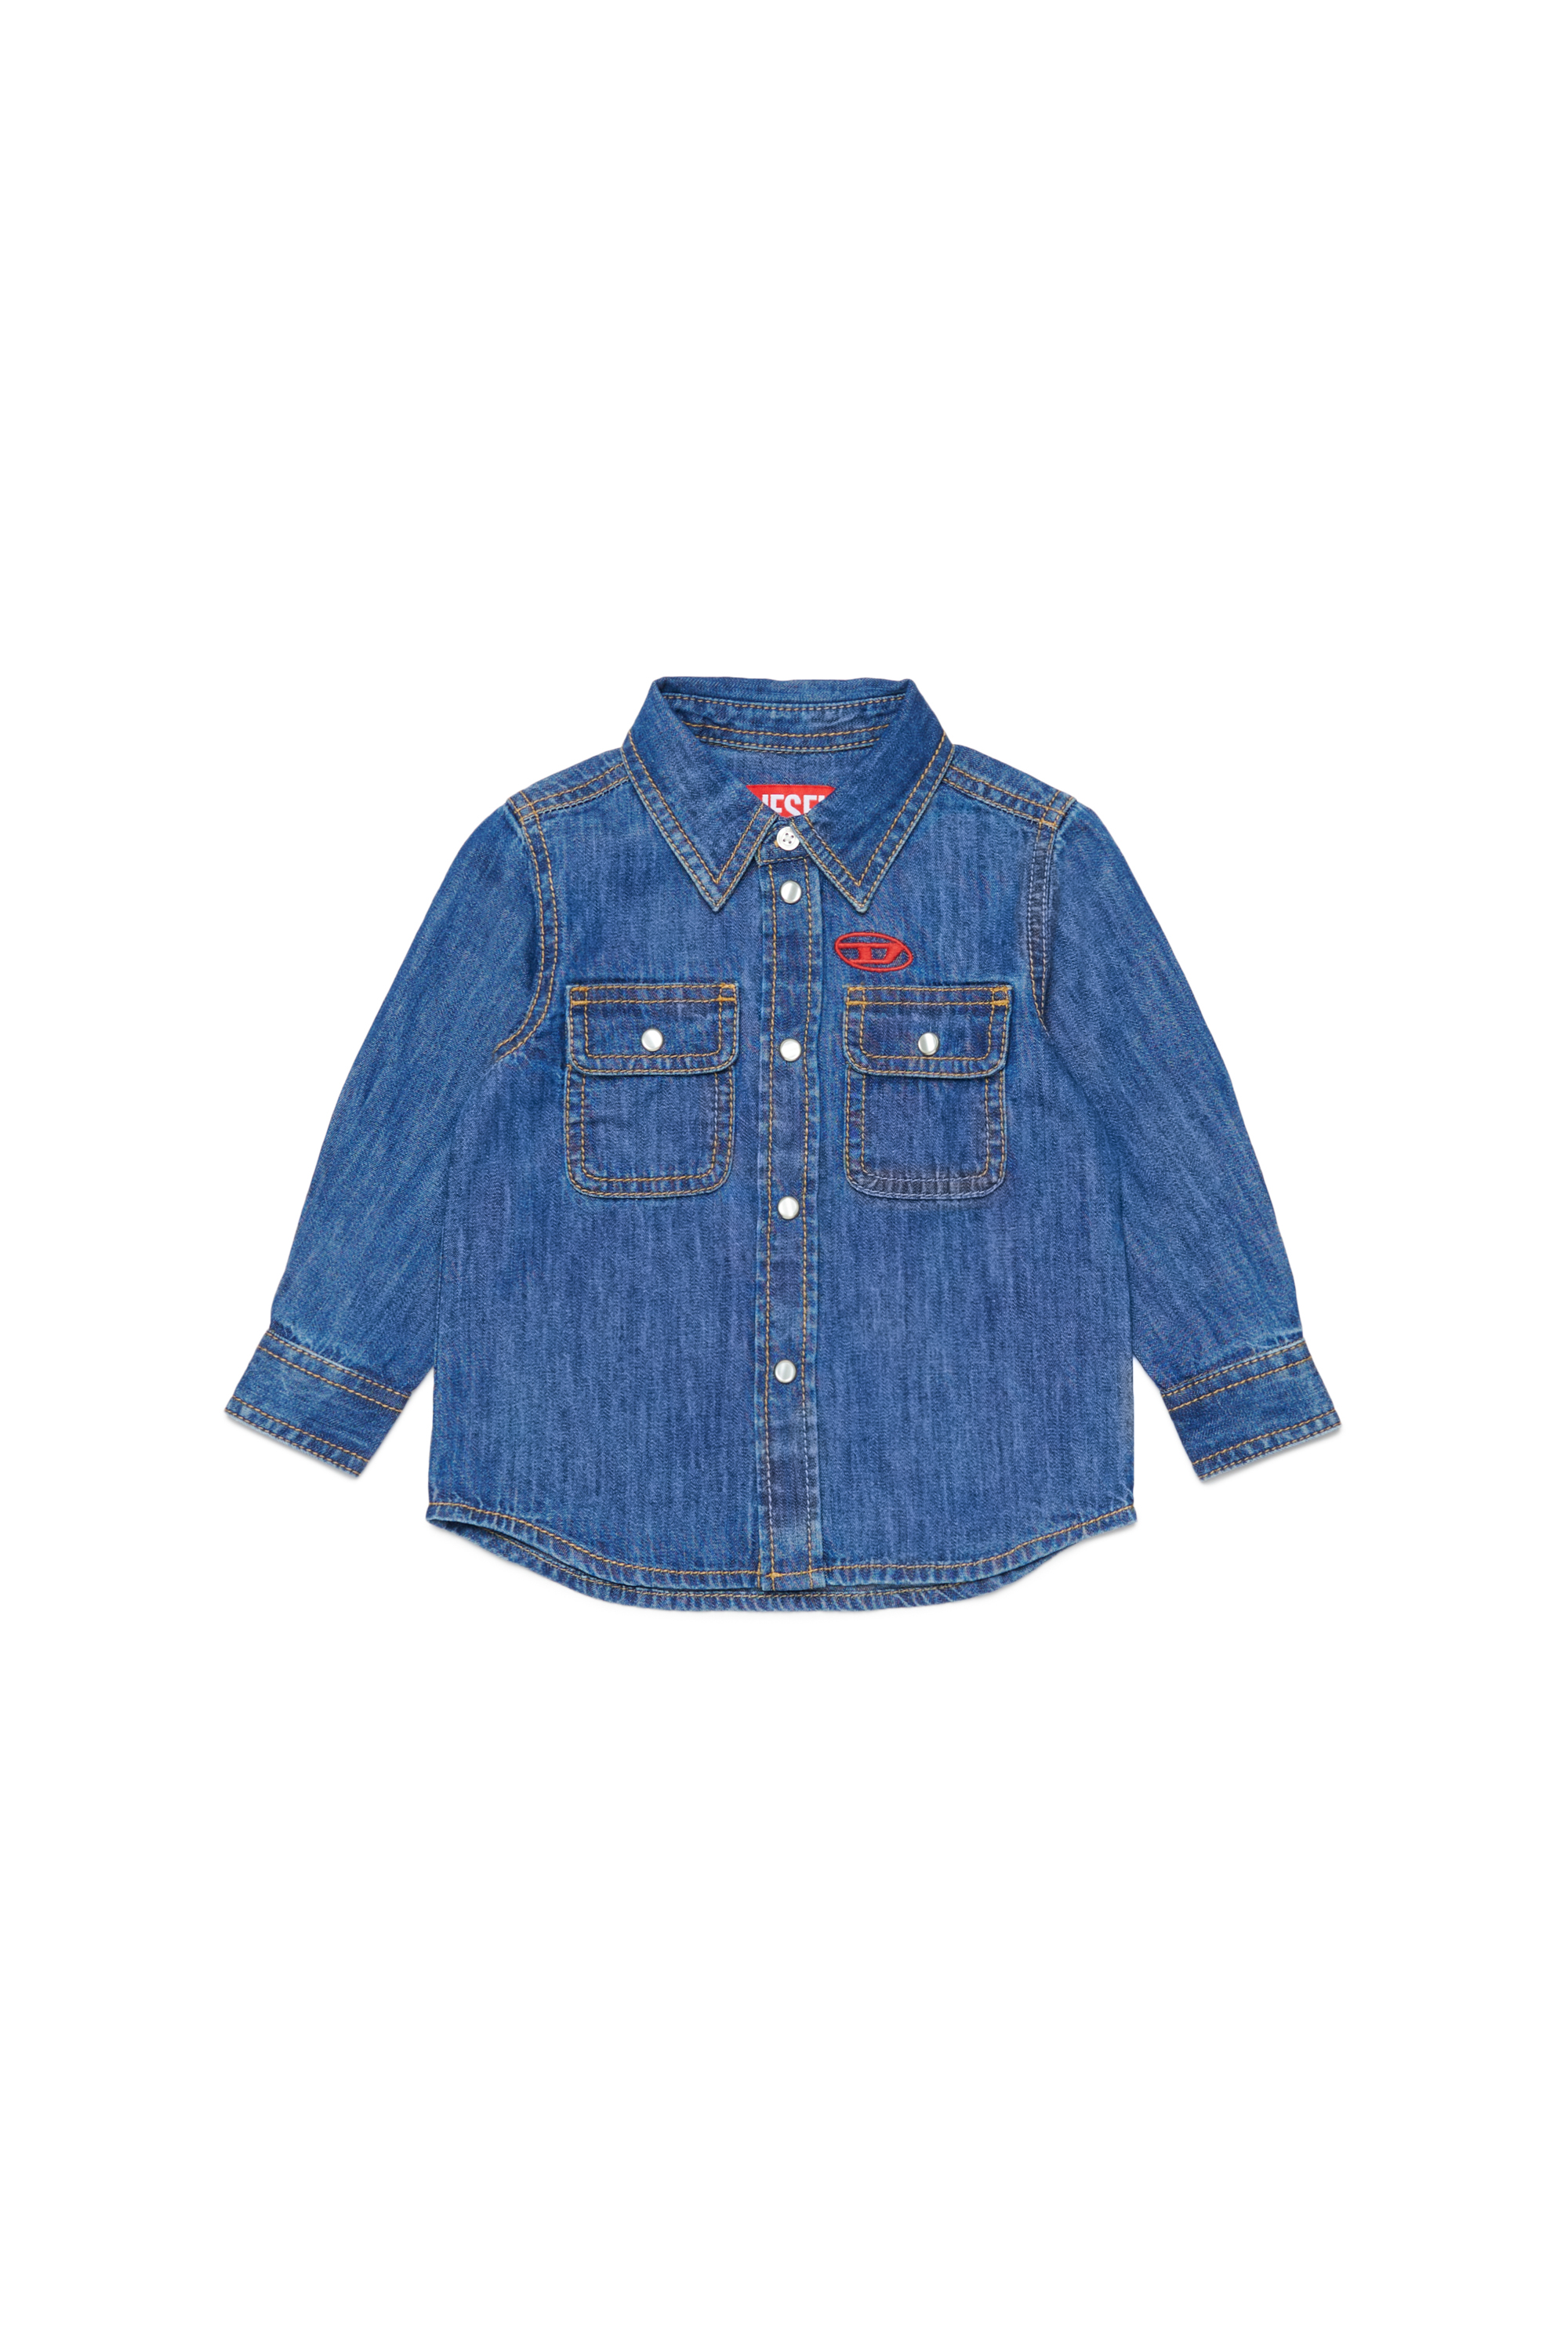 Diesel - CARTOB, Male Denim shirt with Oval D embroidery in ブルー - Image 1